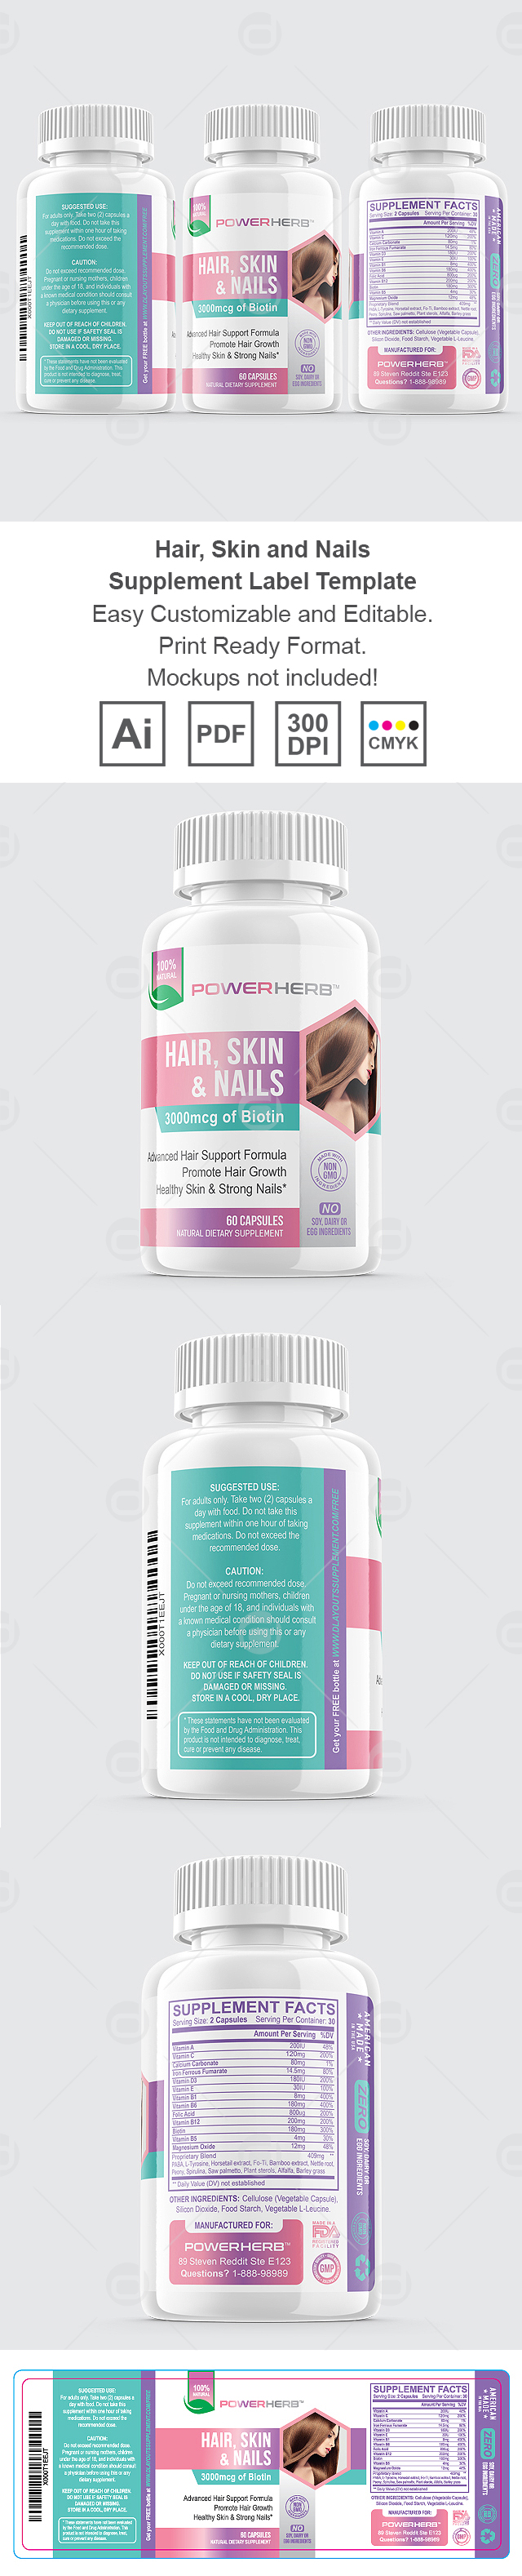 Hair, Skin and Nails Supplement Label Template